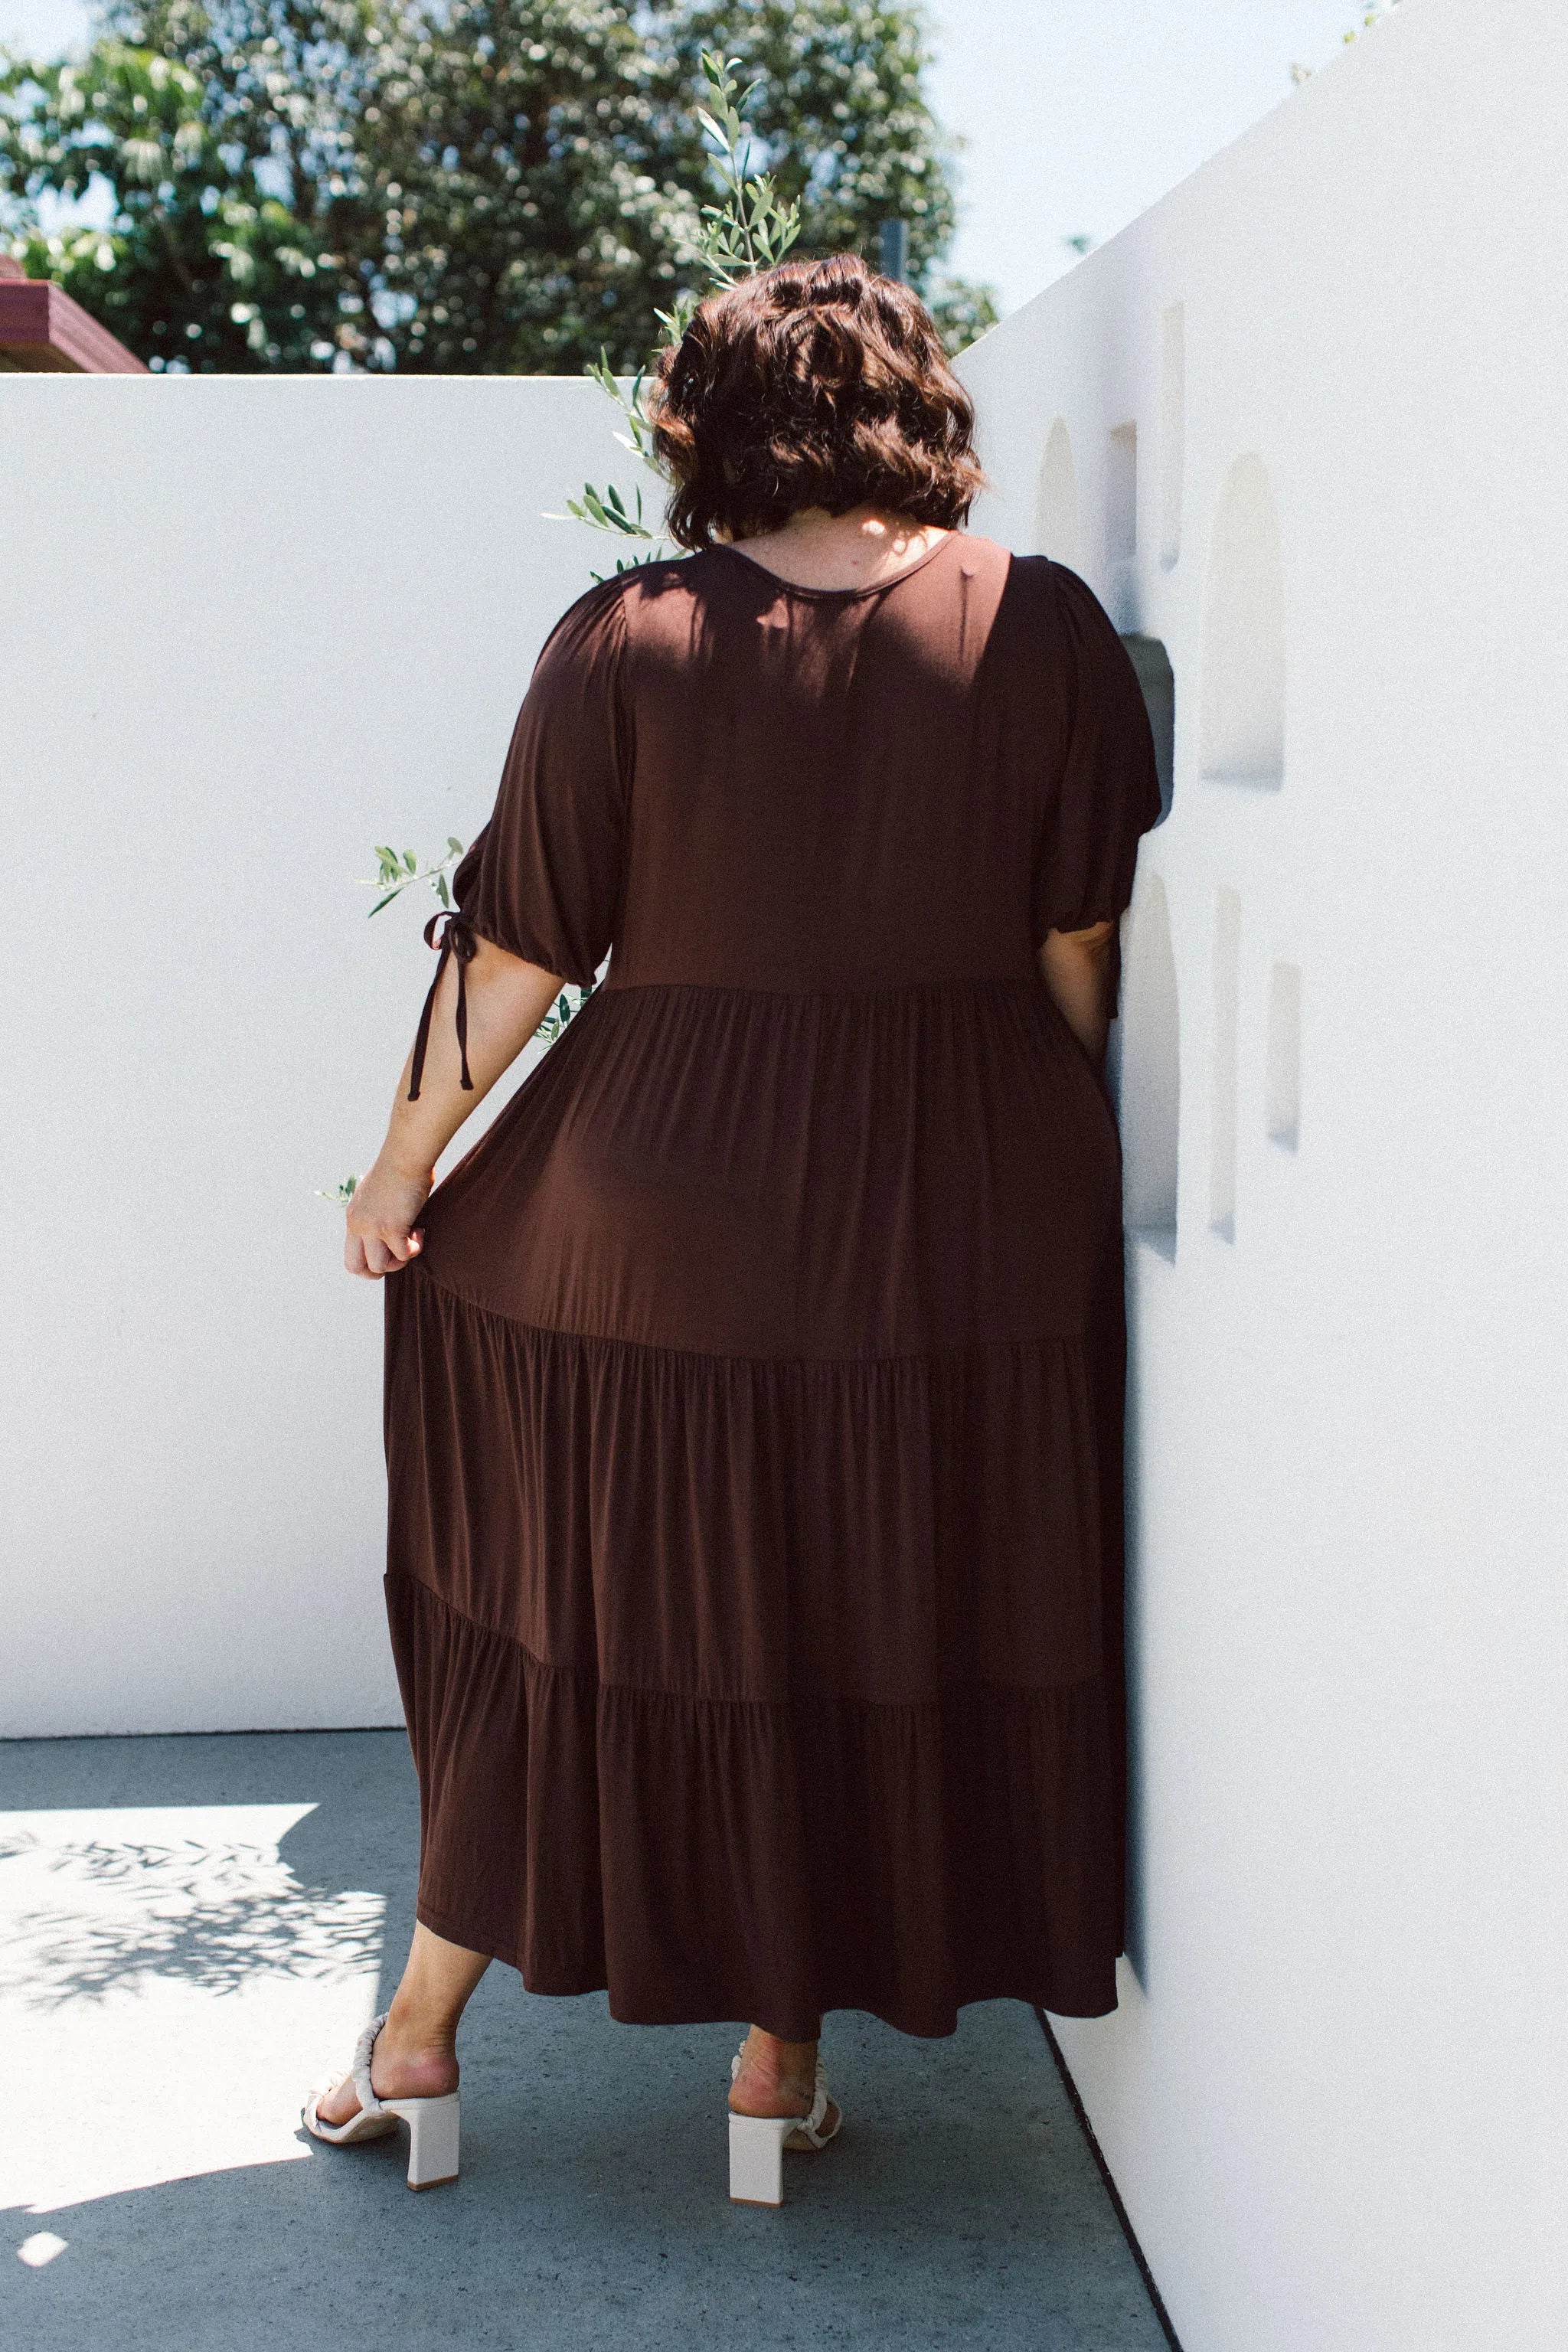 Chic Chocolate Colored Plus Size Dress - Harlow Dress for Women